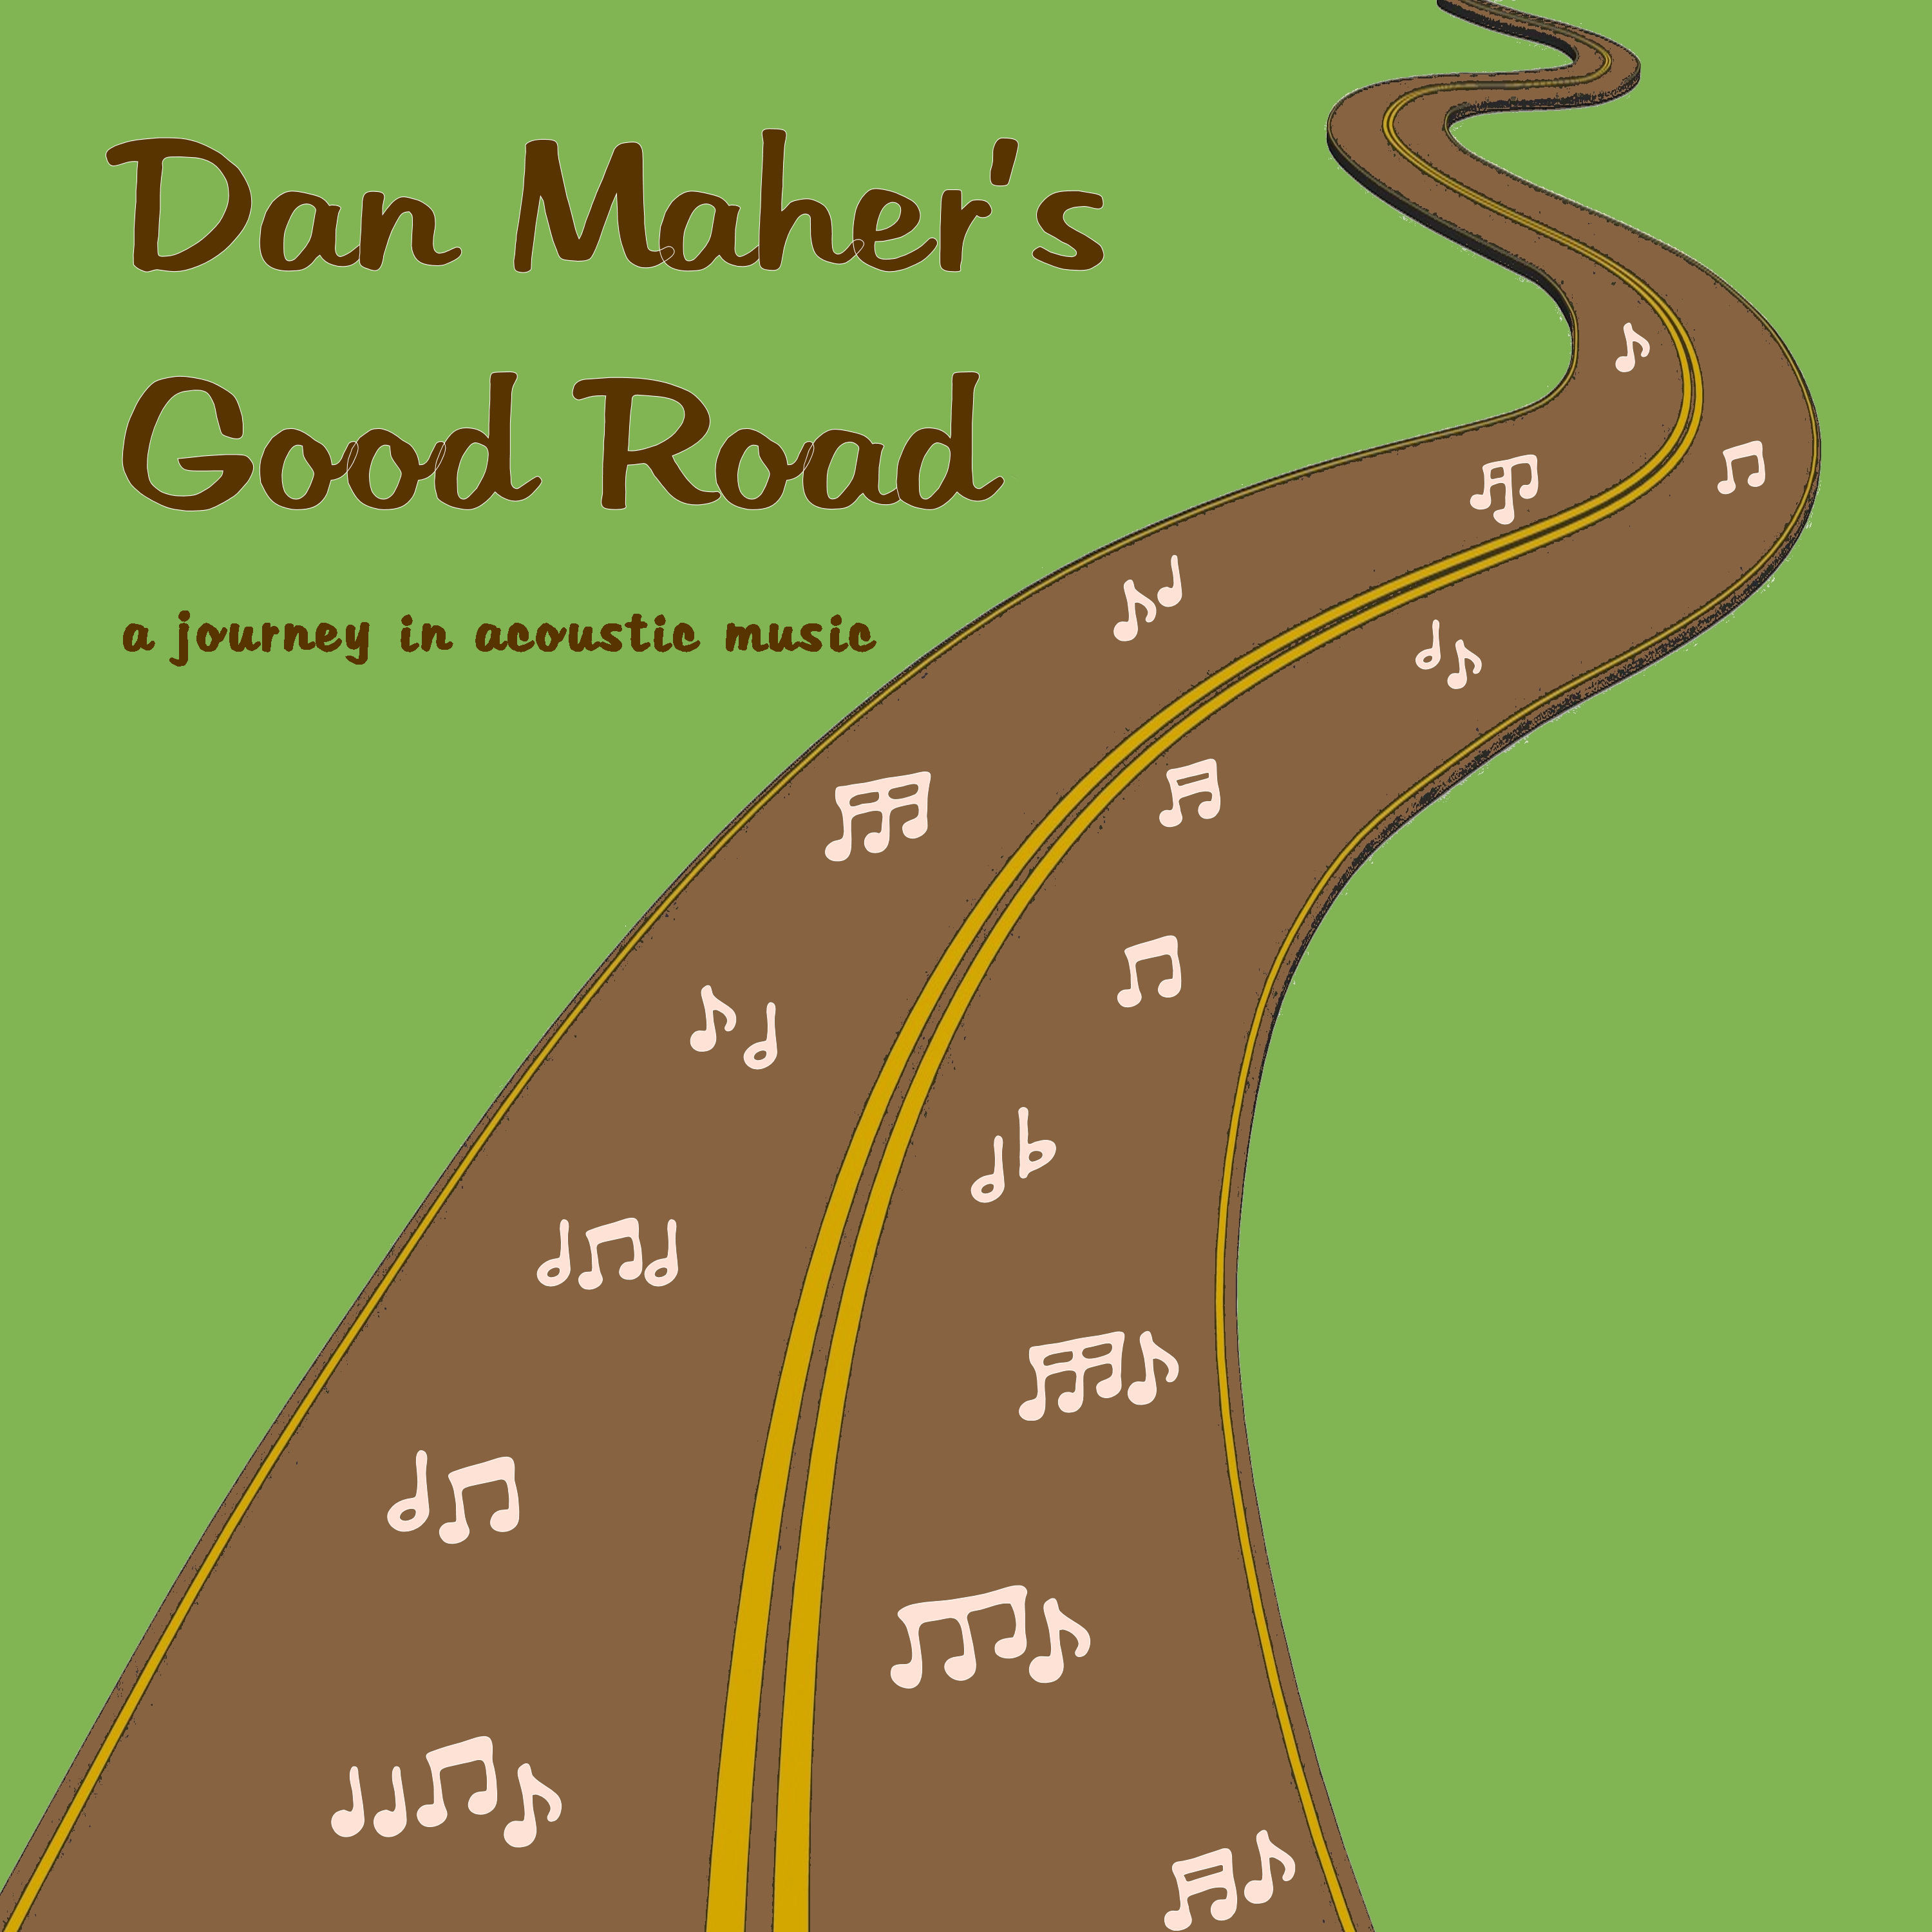 Dan Maher's Good Road - A Journey in Acoustic Music